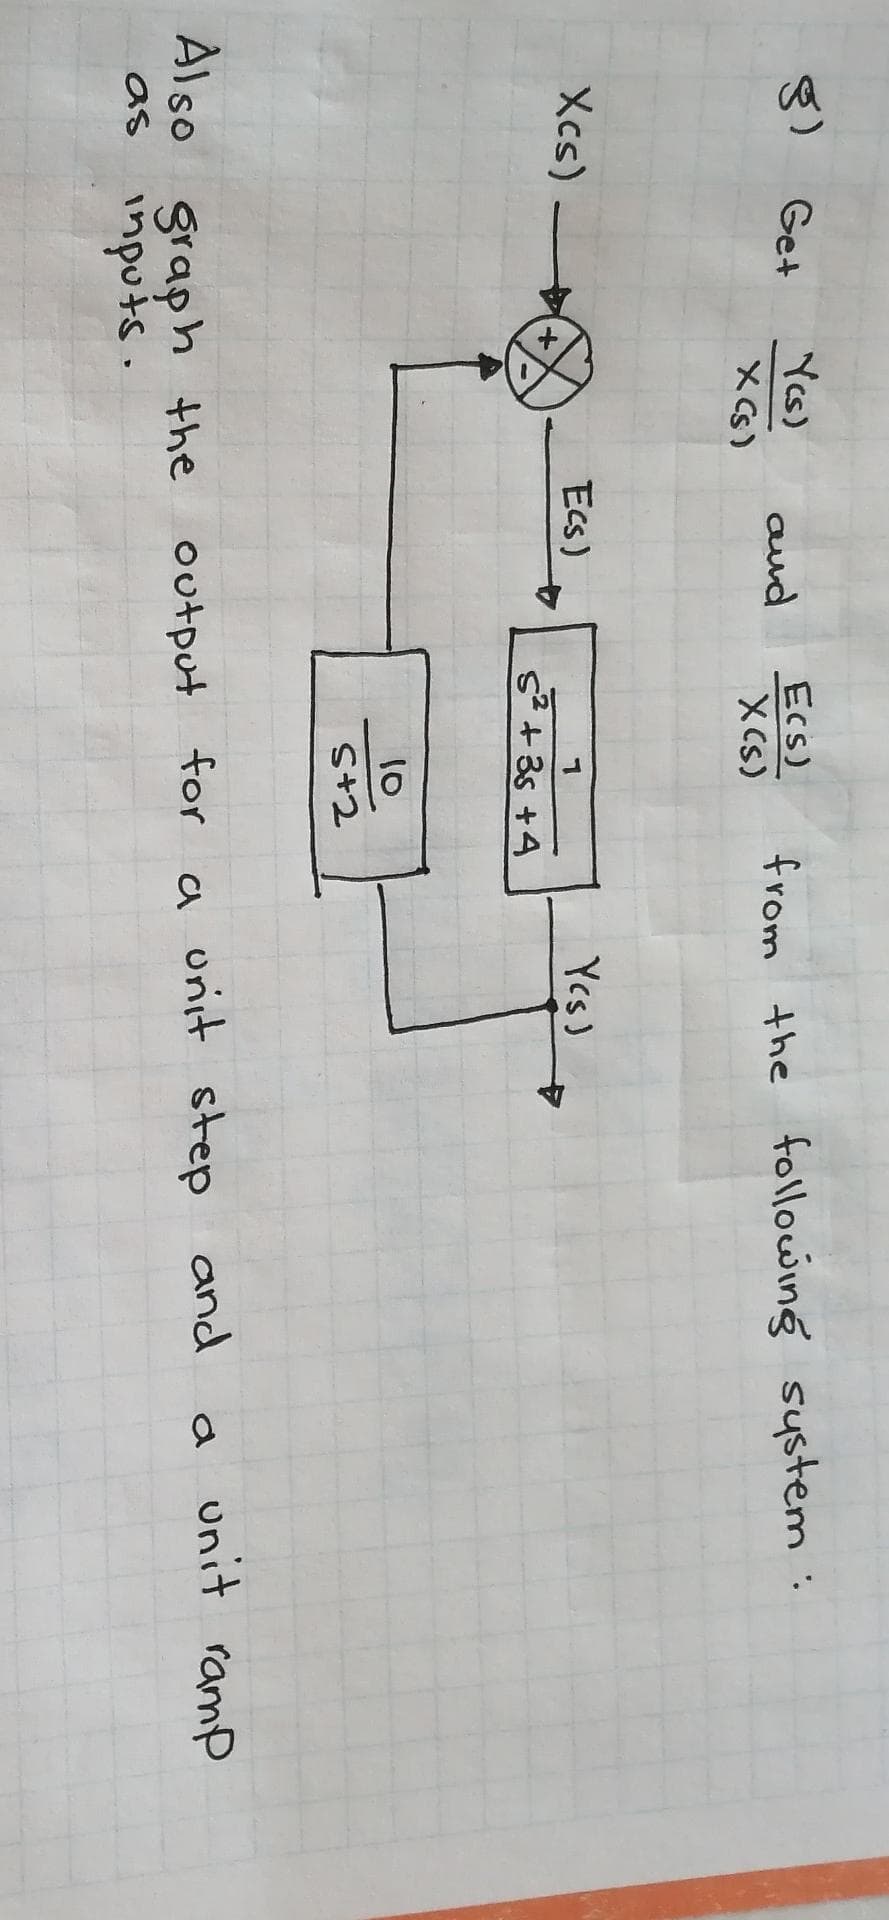 Xcs)
Get
Y(s)
X (s)
and
Ecs)
E(s)
X (s)
7
S²+35 +4
Also graph the output
as inputs.
10
5+2
from the following system:
output for
a
Y(s)
unit step and
a unit ramp